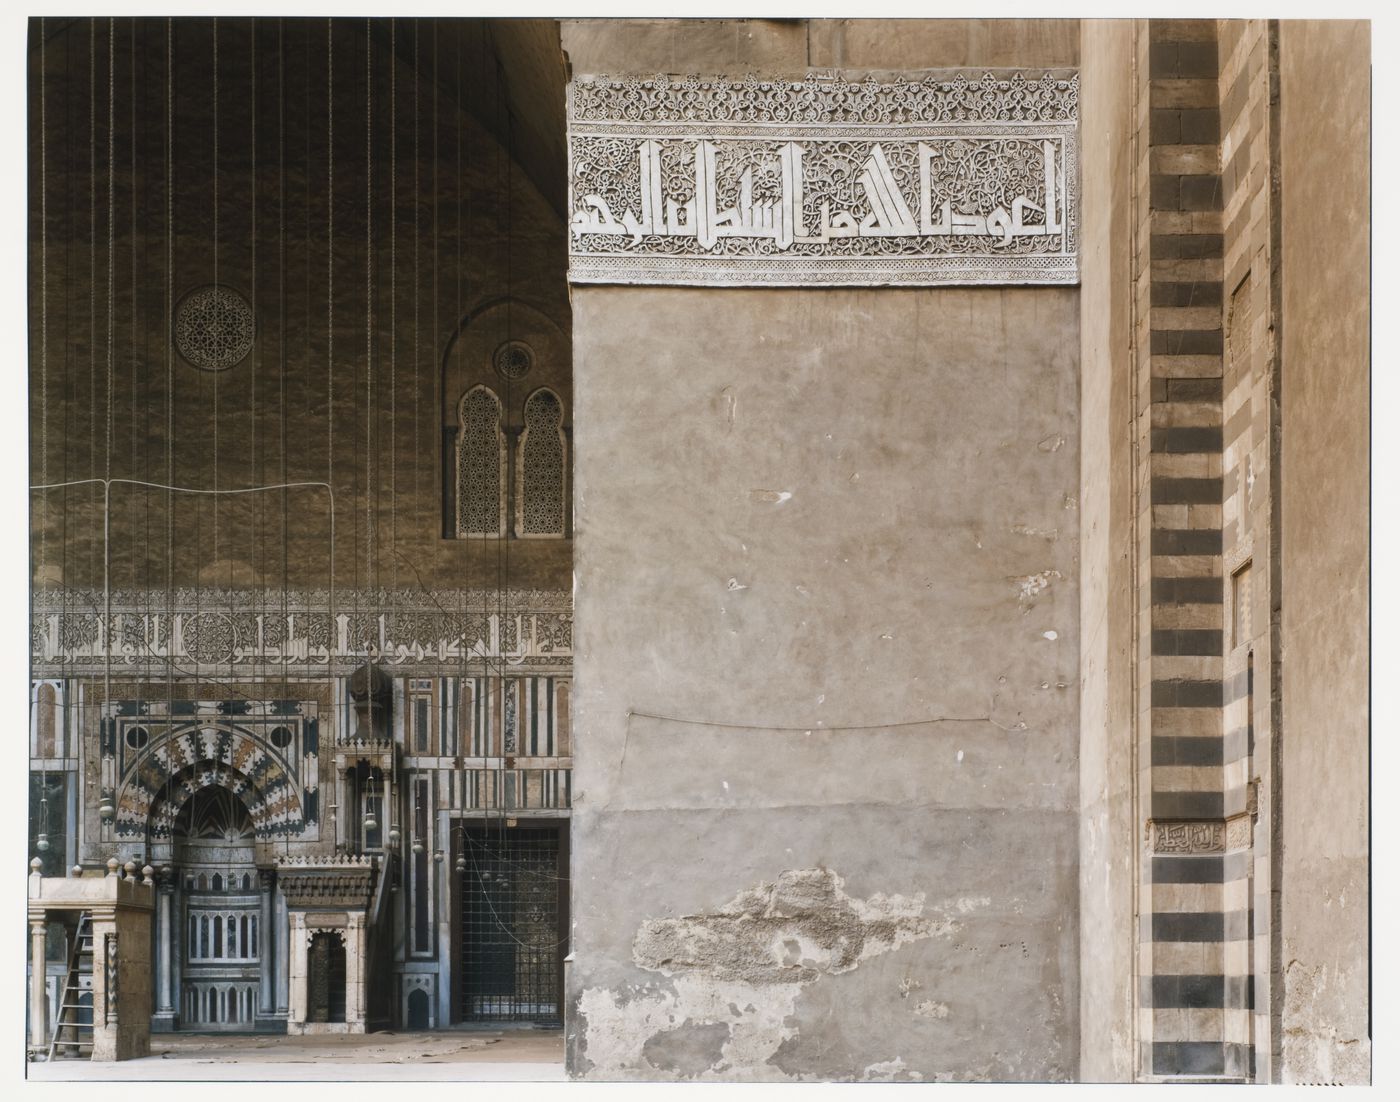 Mosque of Sultan Hassan, interior view of wall with stone tracery border, with room beyond, Cairo, Egypt